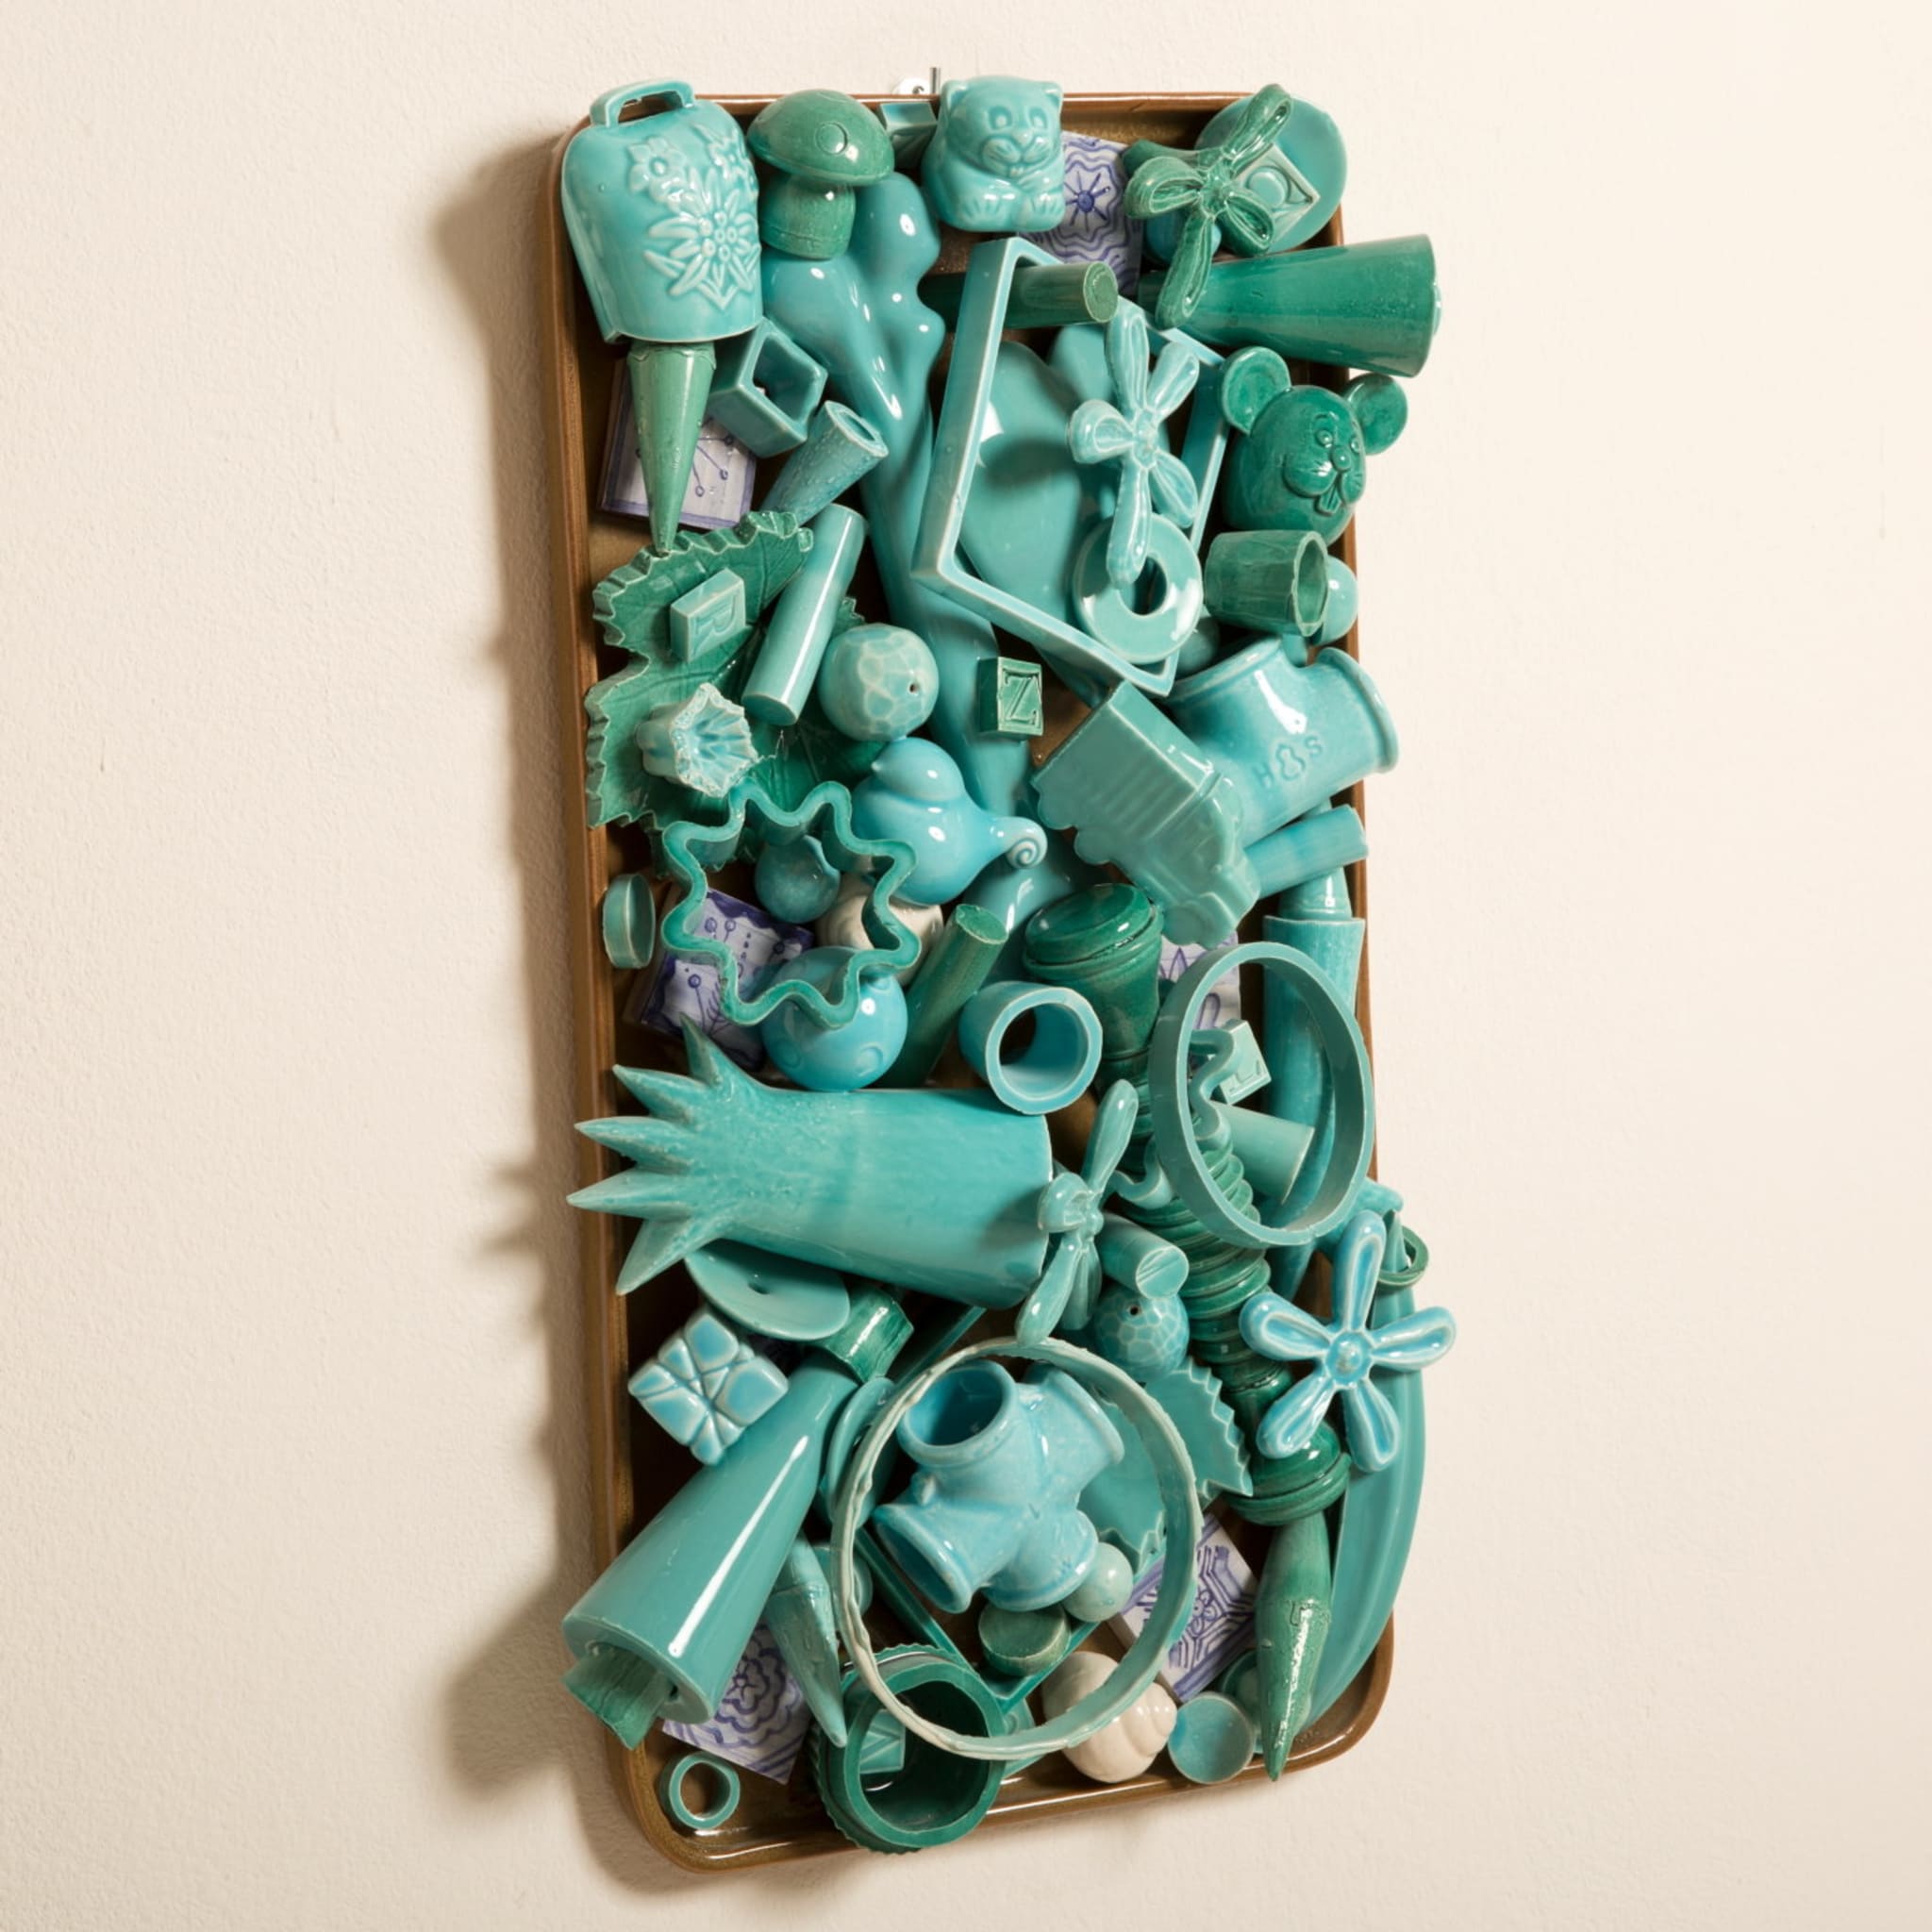 Turquoise Charms Wall Sculpture - Alternative view 1